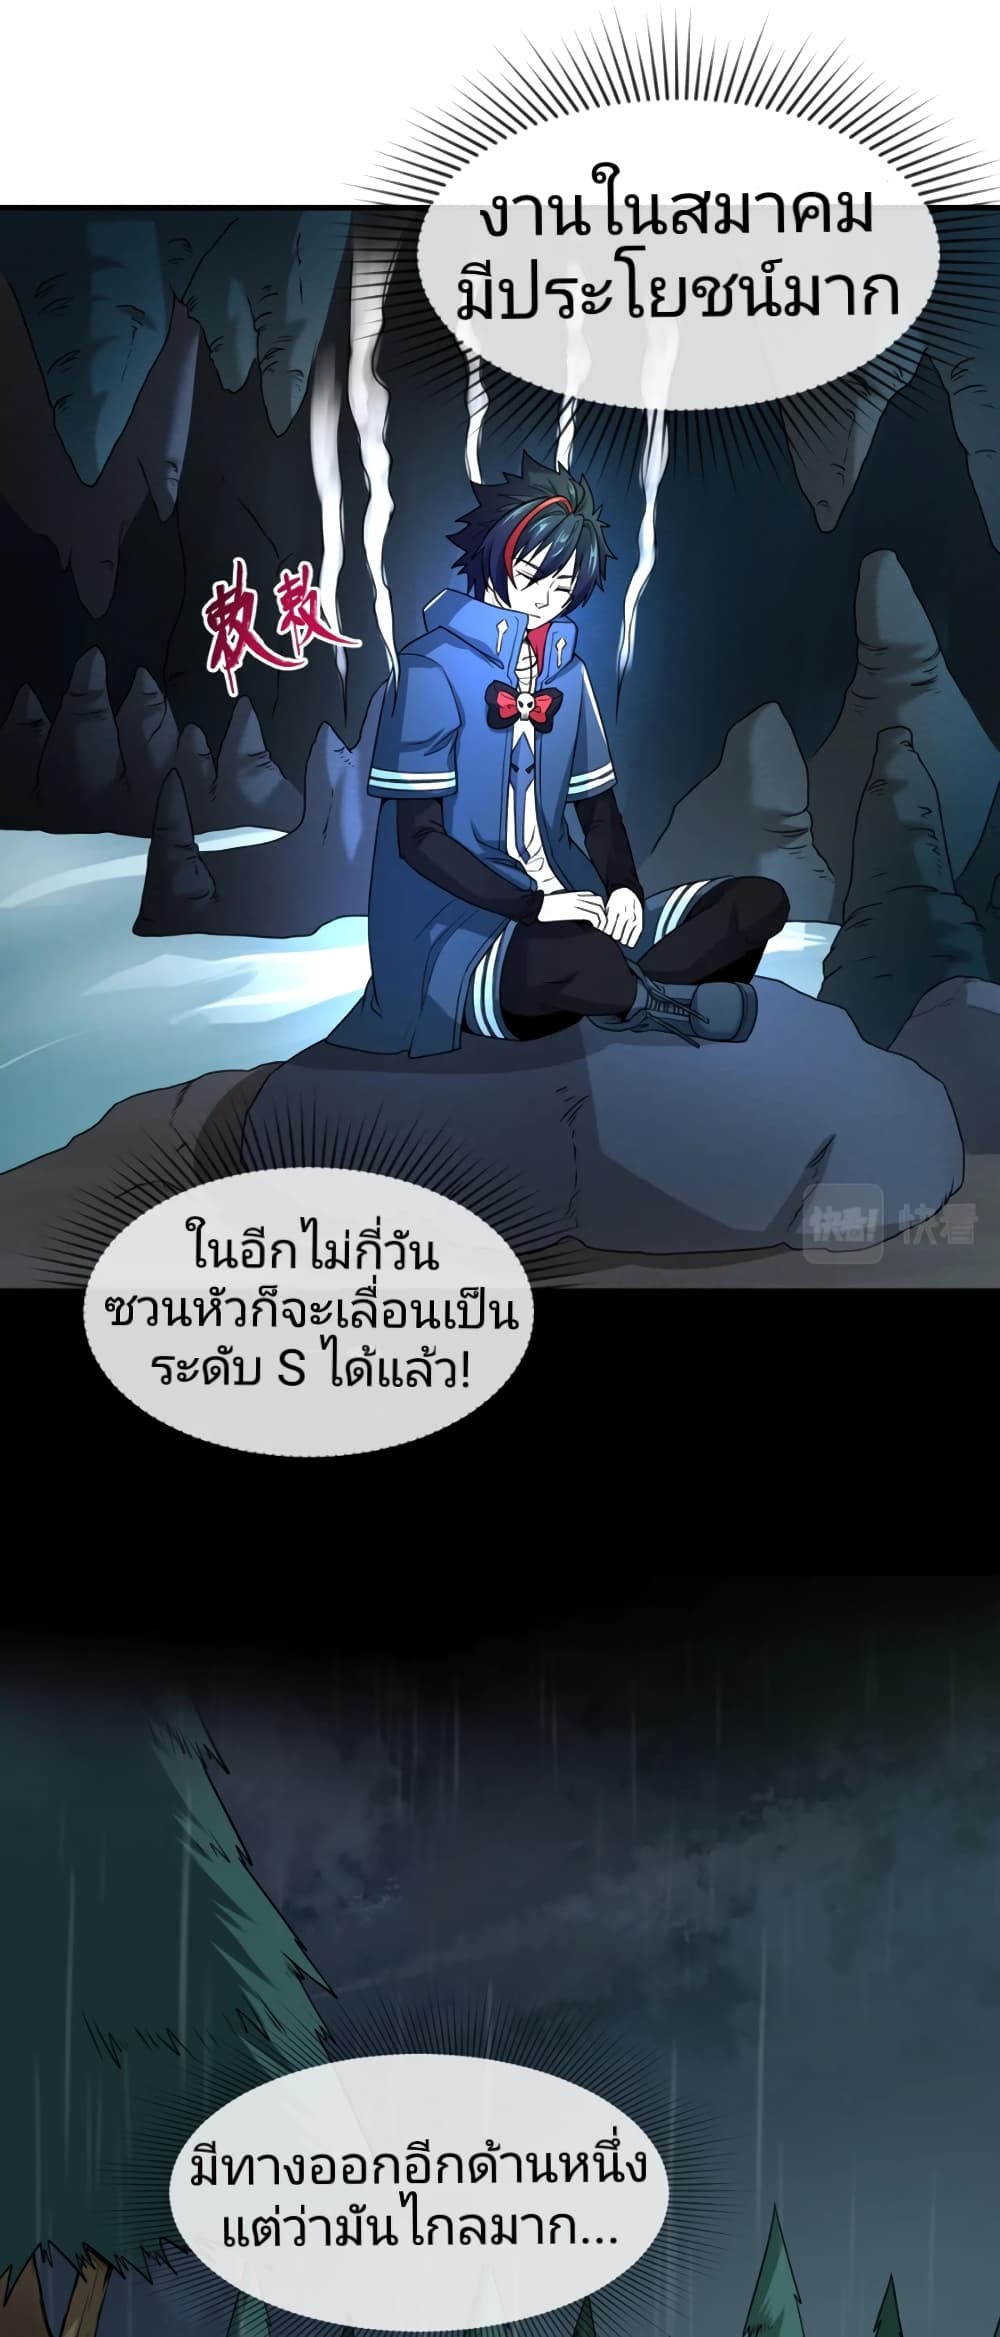 The Age of Ghost Spirits à¸à¸­à¸à¸à¸µà¹ 23 (12)